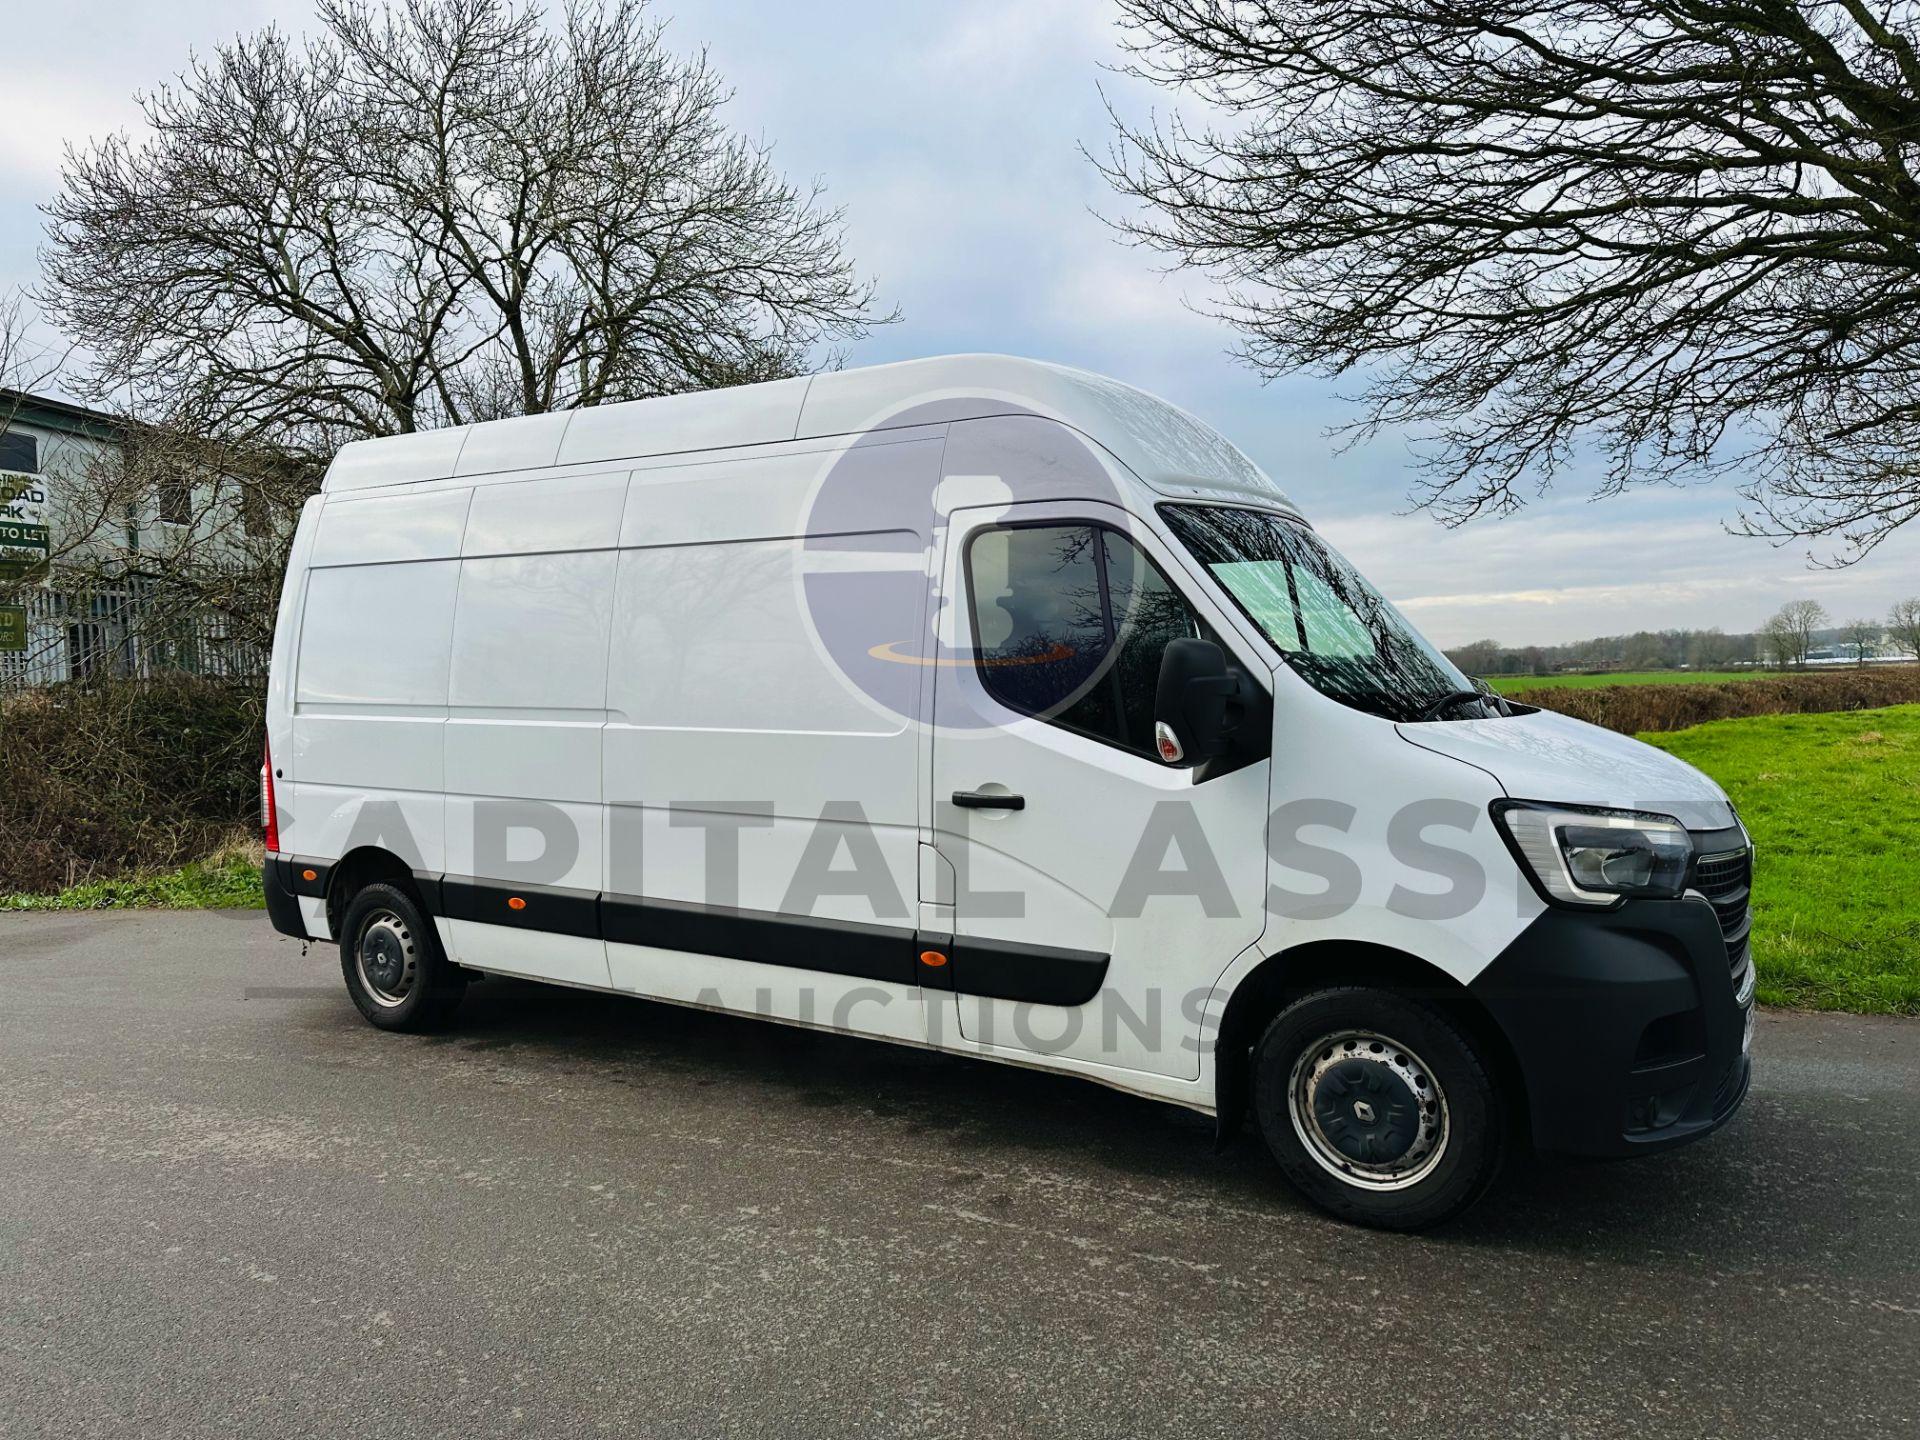 (ON SALE) RENAULT MASTER 2.3 DCI LWB *BUSINESS EDITION* - 2020 MODEL - ONLY 85K MILES - EURO 6